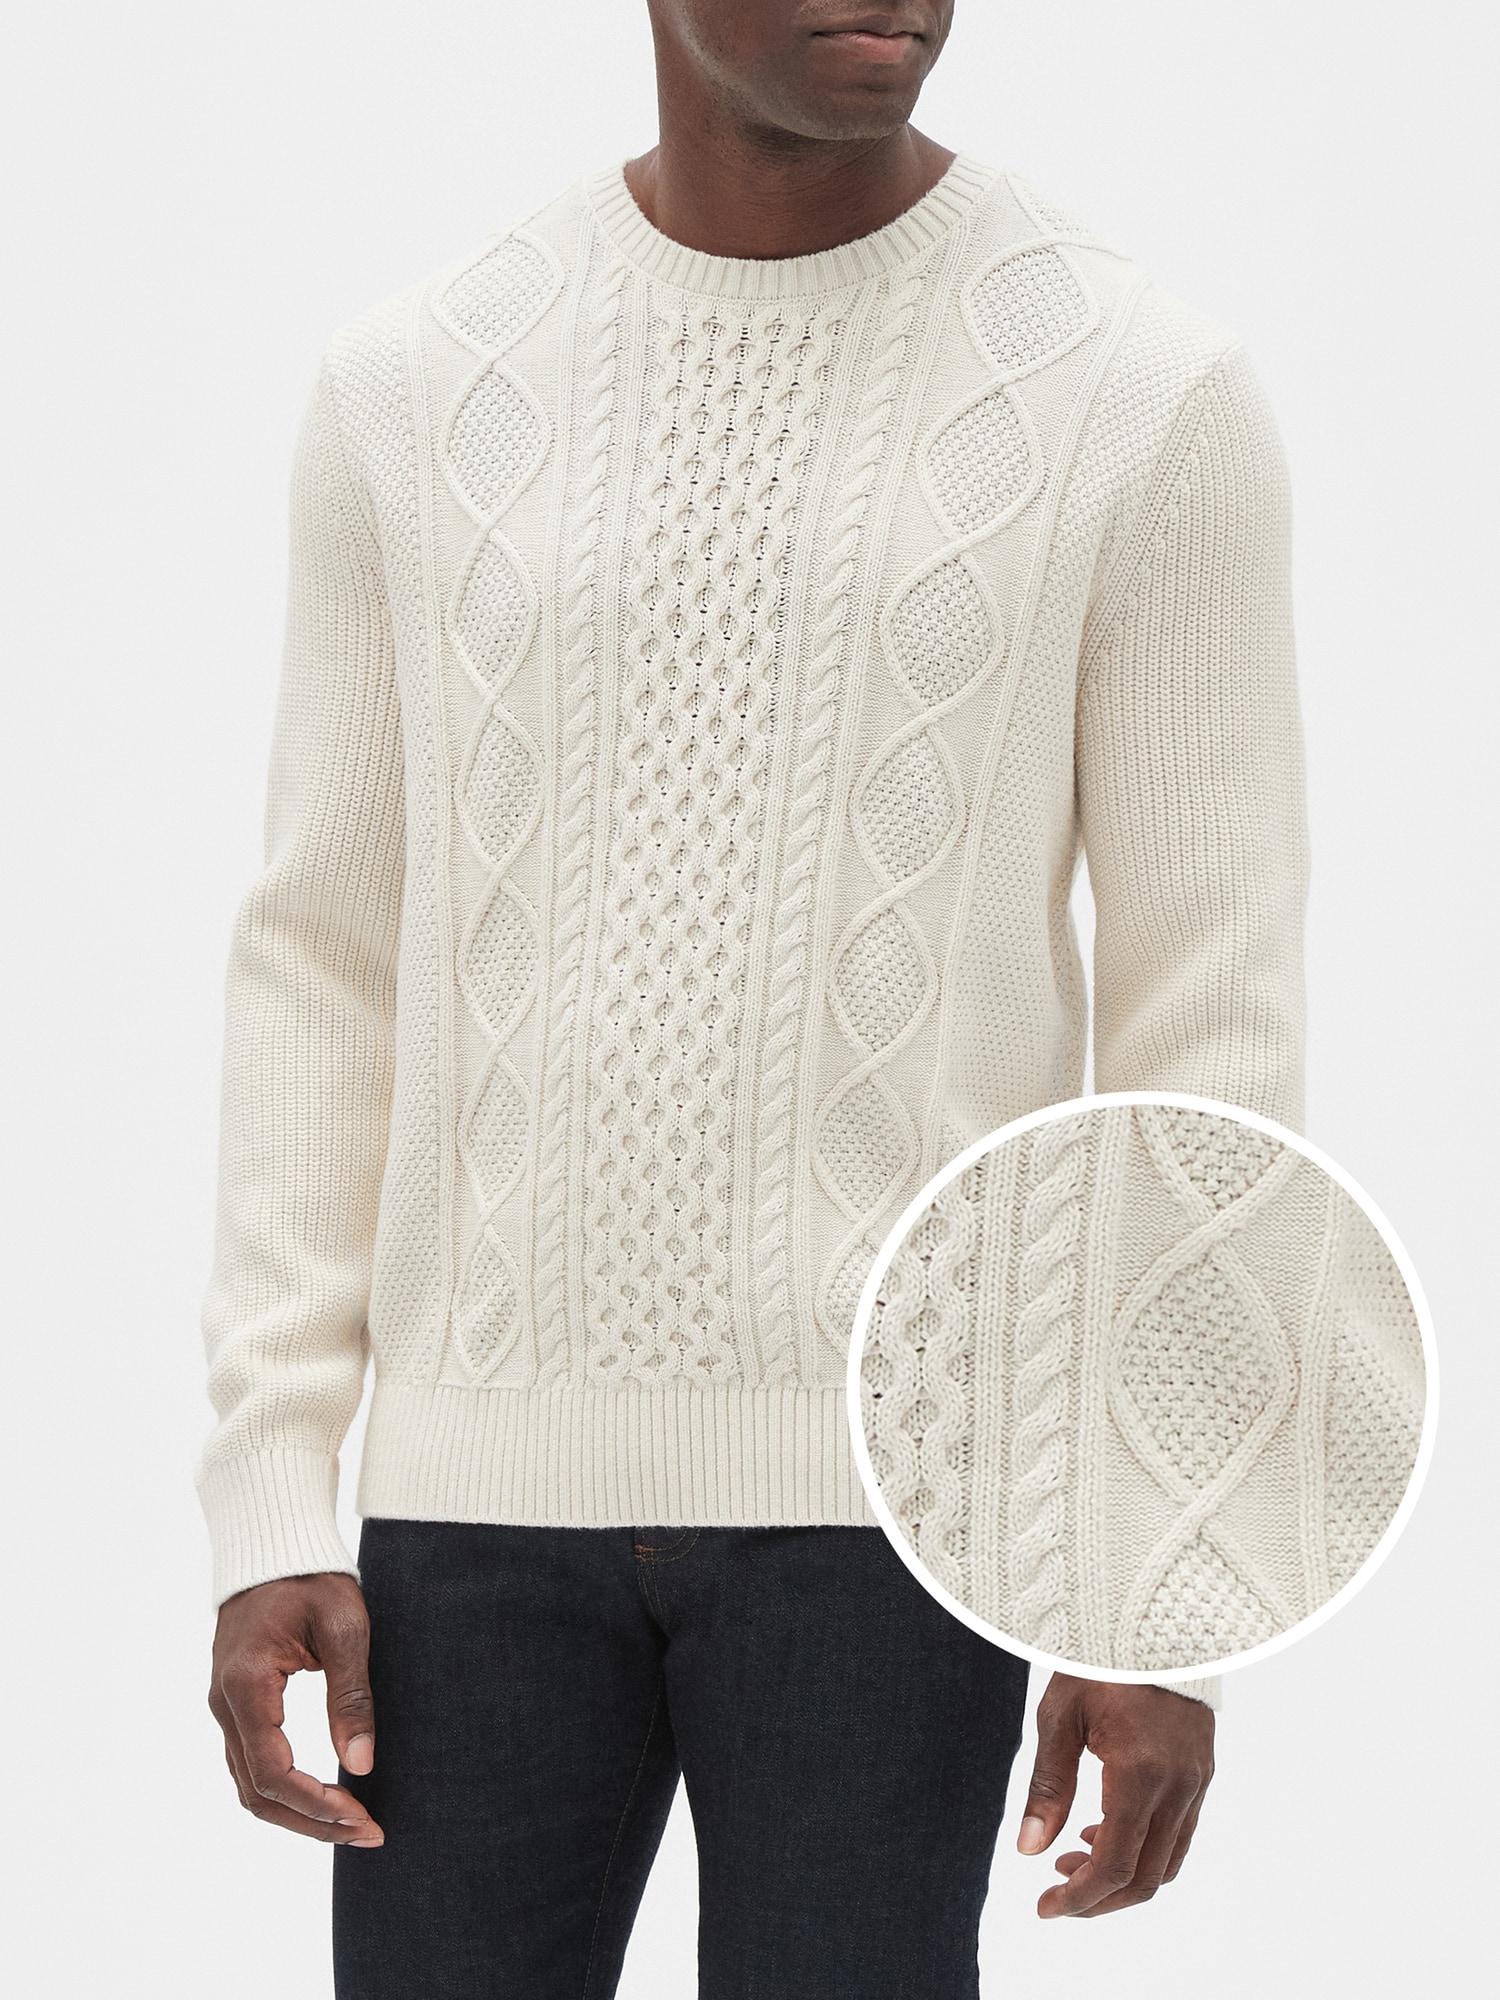 Lyst - Gap Factory Cable-knit Crewneck Pullover Sweater in White for Men